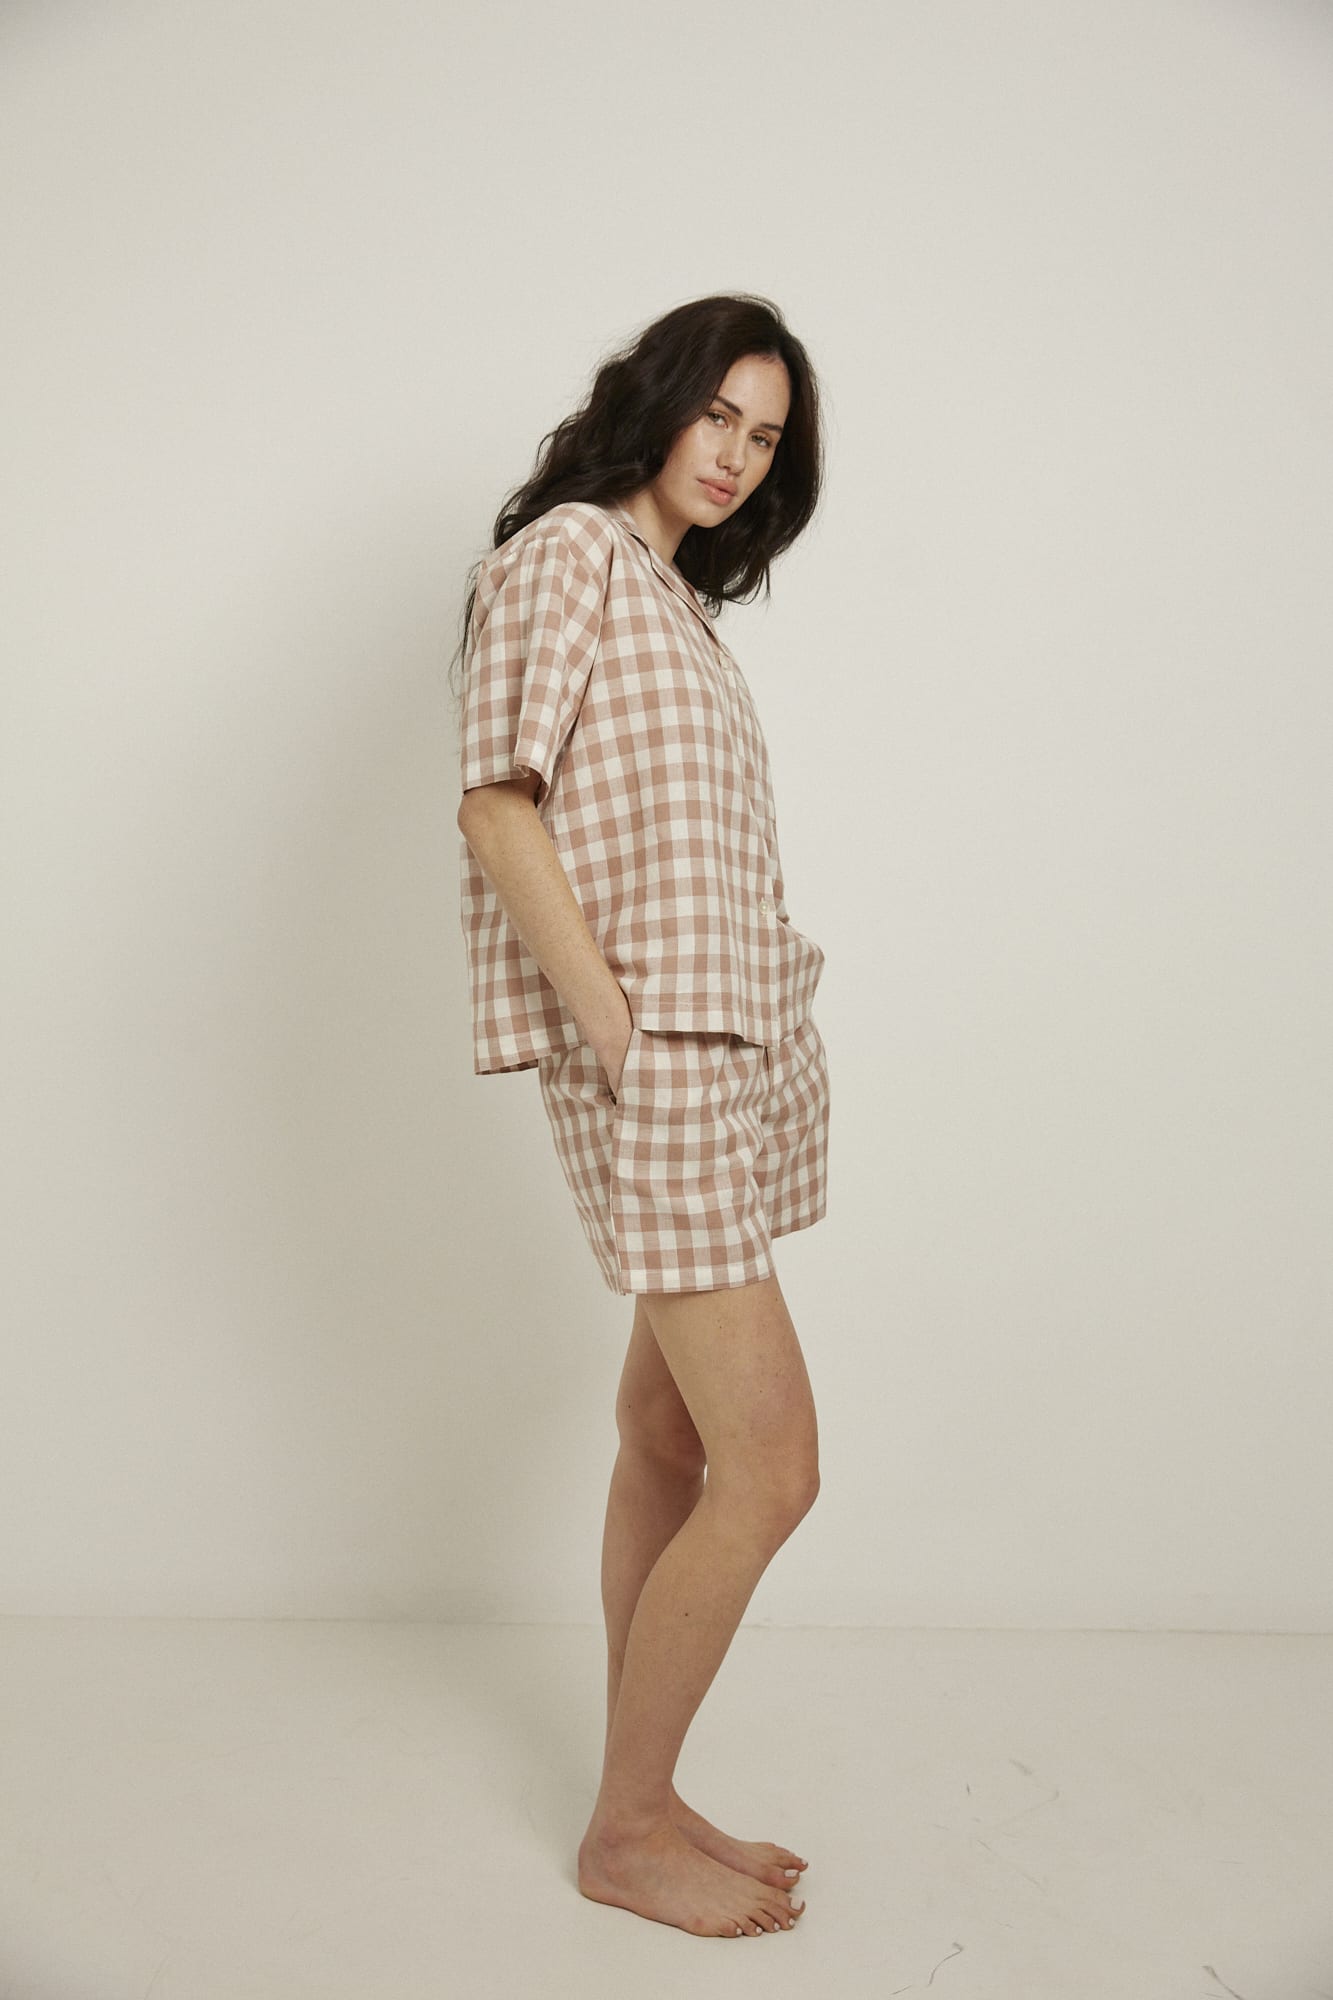 Women’s pyjama set including a short sleeve shirt and shorts. Made from an organic cotton and linen blend, in a pink and white check.  The shirt has shell buttons, a front pocket and a back pleat with locker loop detail.  The shorts feature natural shell buttons and an elasticated waistband for comfort.